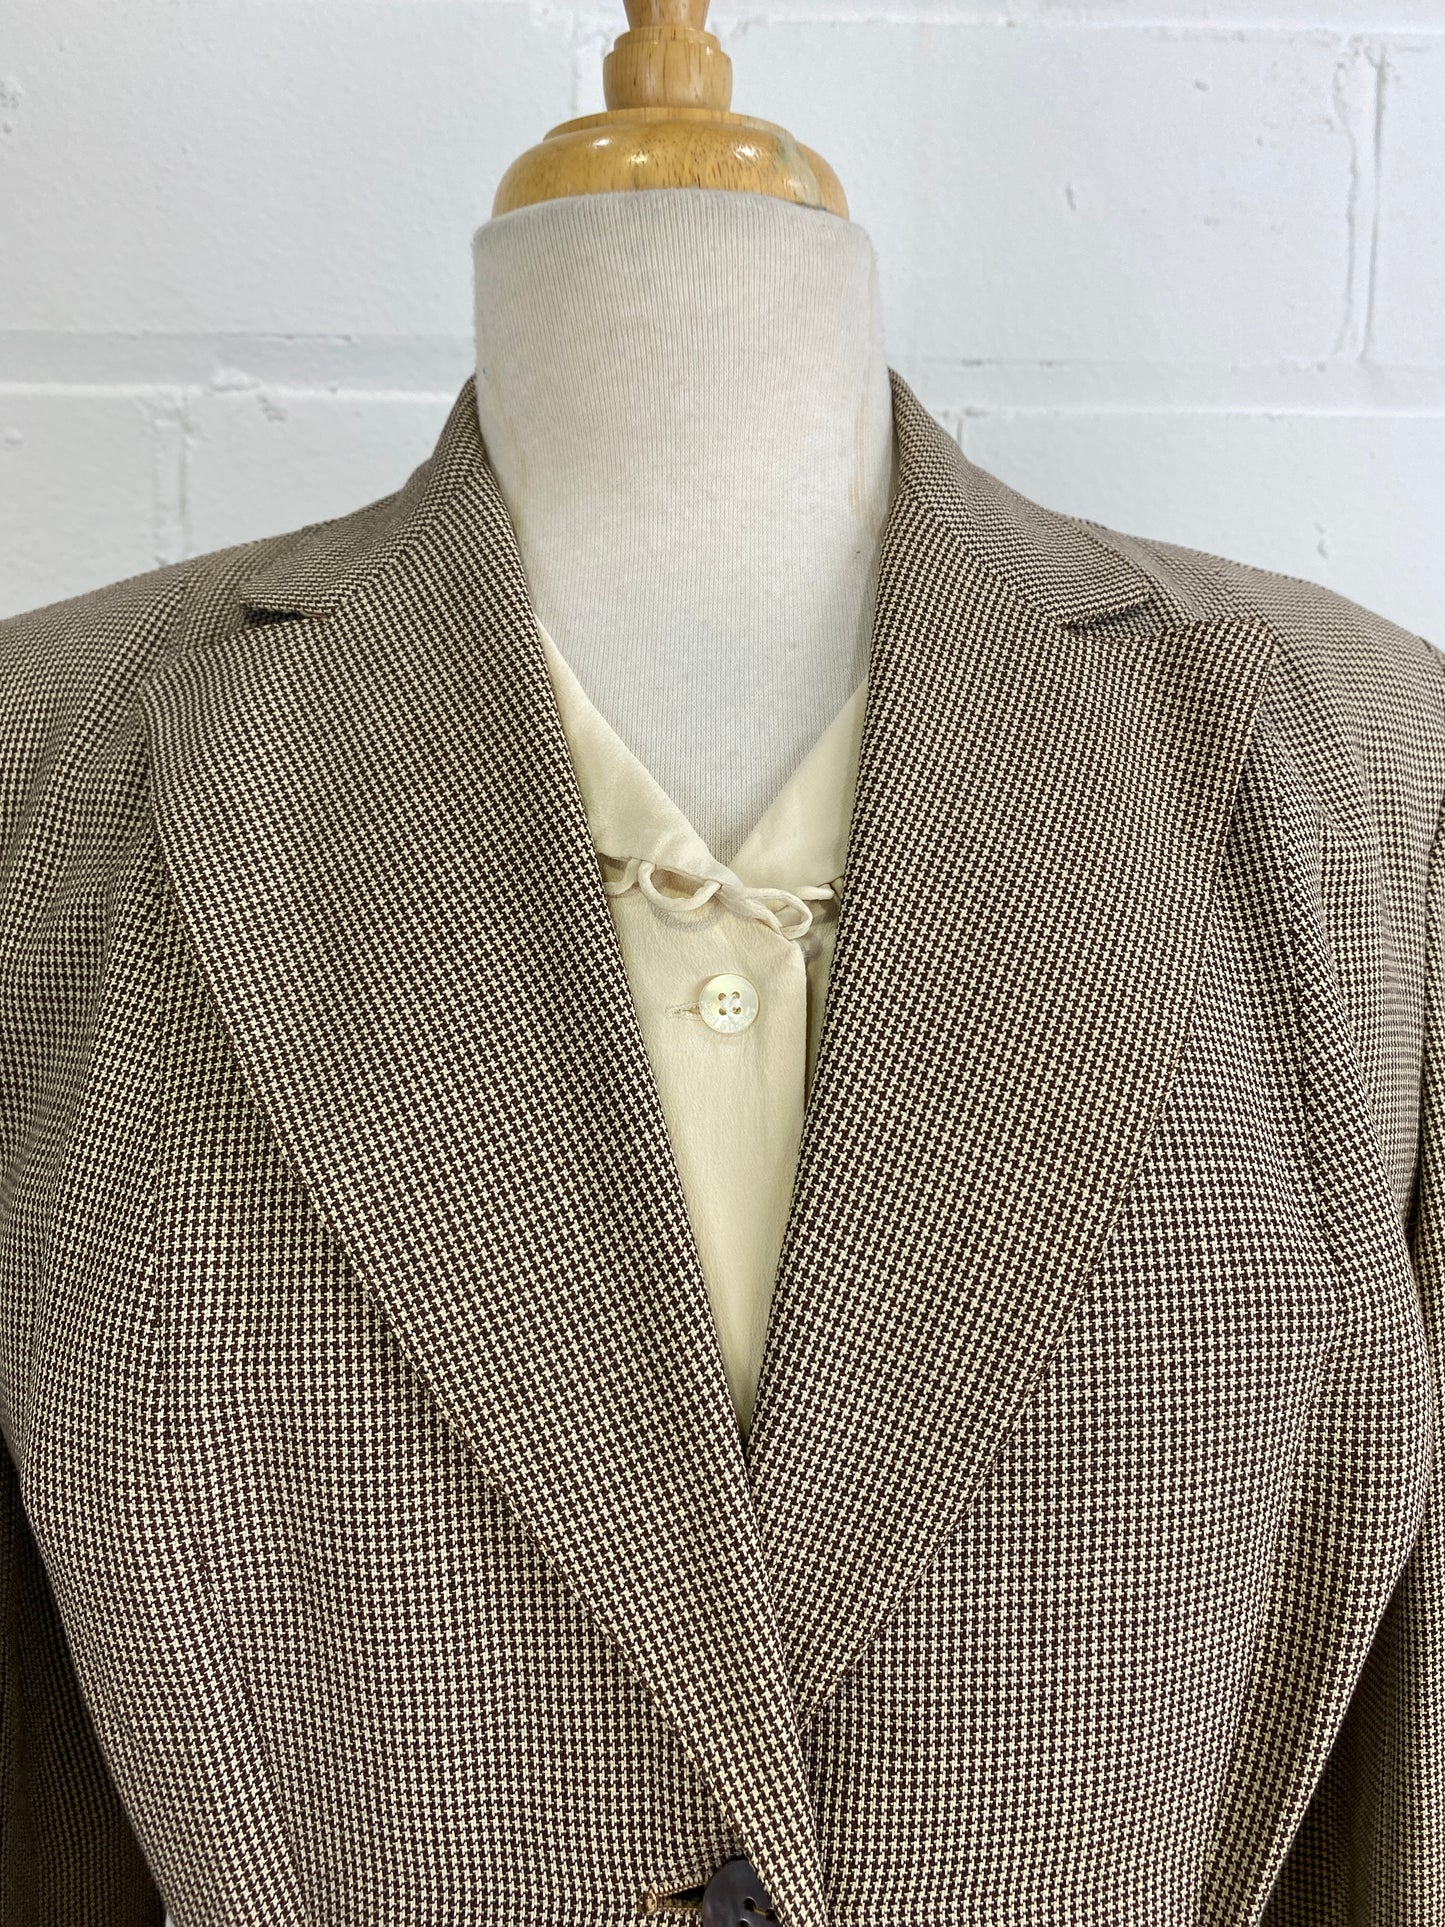 Vintage 1940s Brown Houndstooth Two-Piece Skirt Suit, Medium 